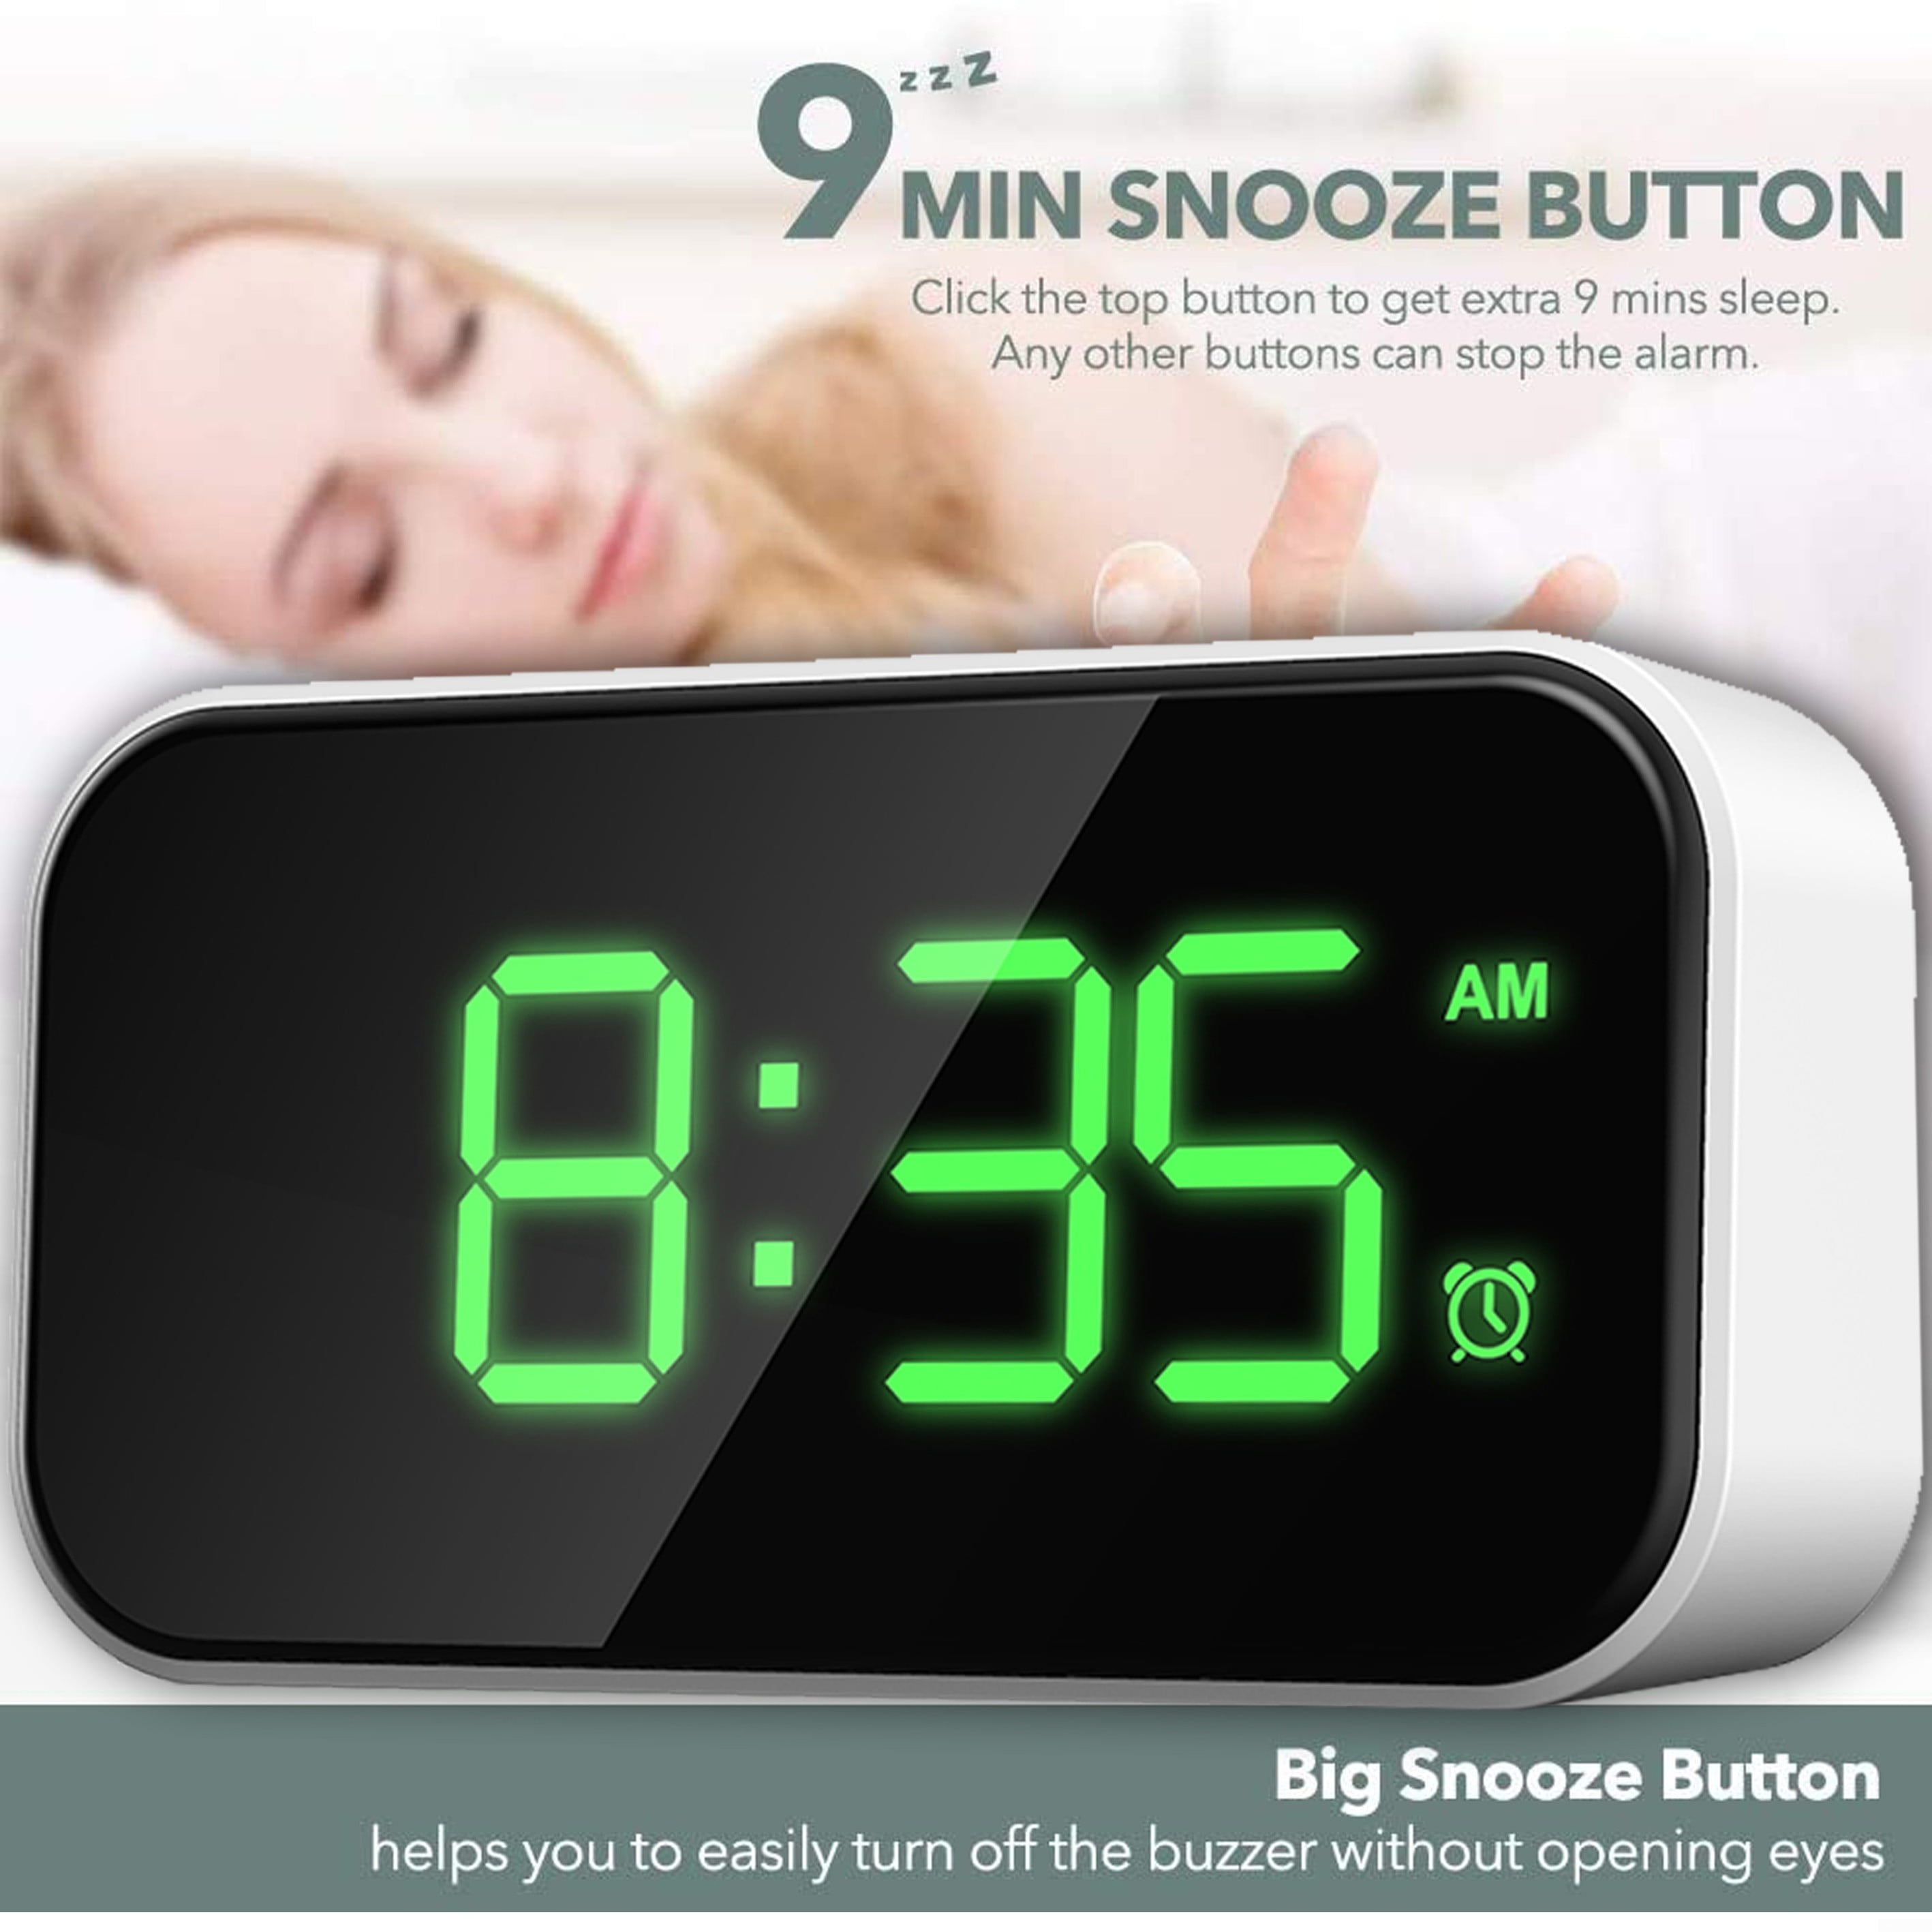 Details about   LED Projection Digital Display Alarm Clock With 7 Color Change Night Lamp 